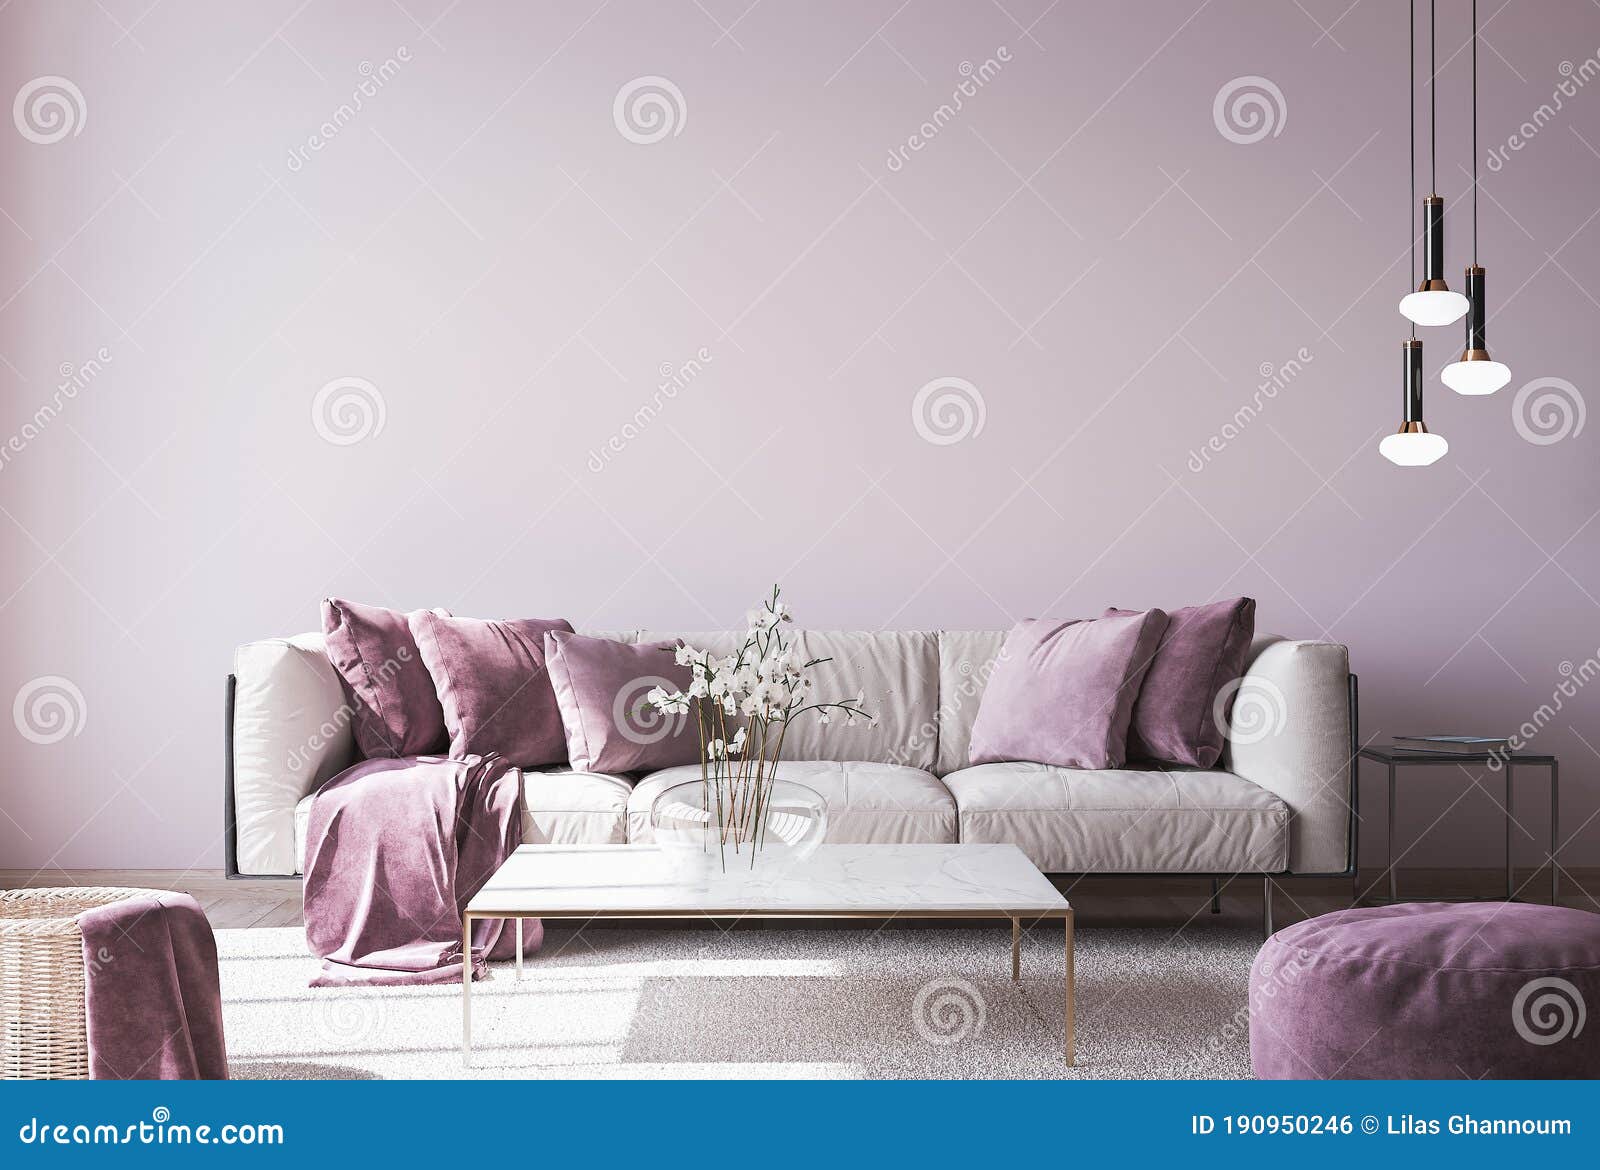 fjols prop påske Wall Mock Up for Modern Sofa on Light Pink Wall Background with Trendy Home  Accessories Stock Illustration - Illustration of apartment, home: 190950246